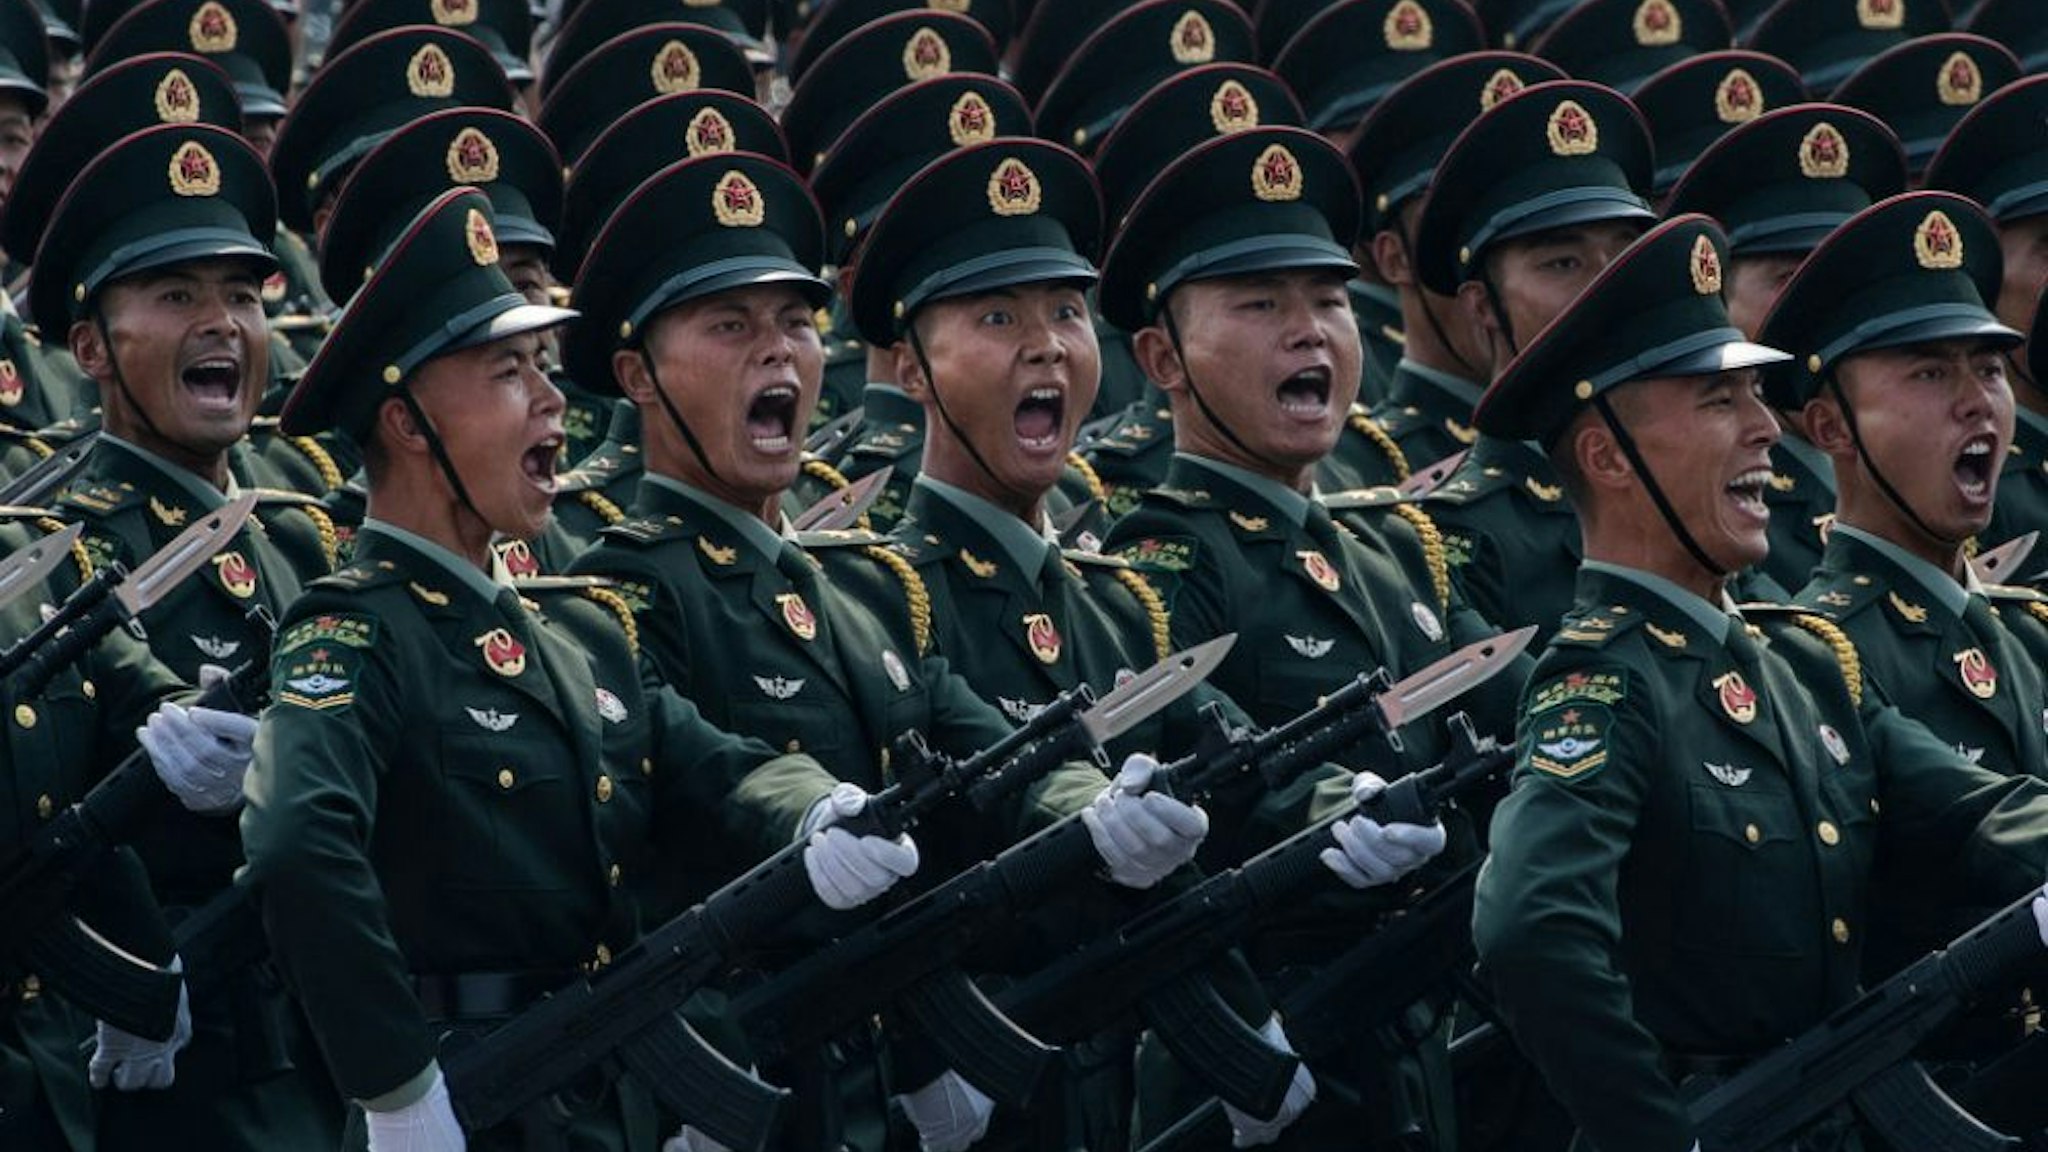 BEIJING, CHINA - OCTOBER 01: Chinese soldiers shout as they march in formation during a parade to celebrate the 70th Anniversary of the founding of the People's Republic of China at Tiananmen Square in 1949, on October 1, 2019 in Beijing, China.